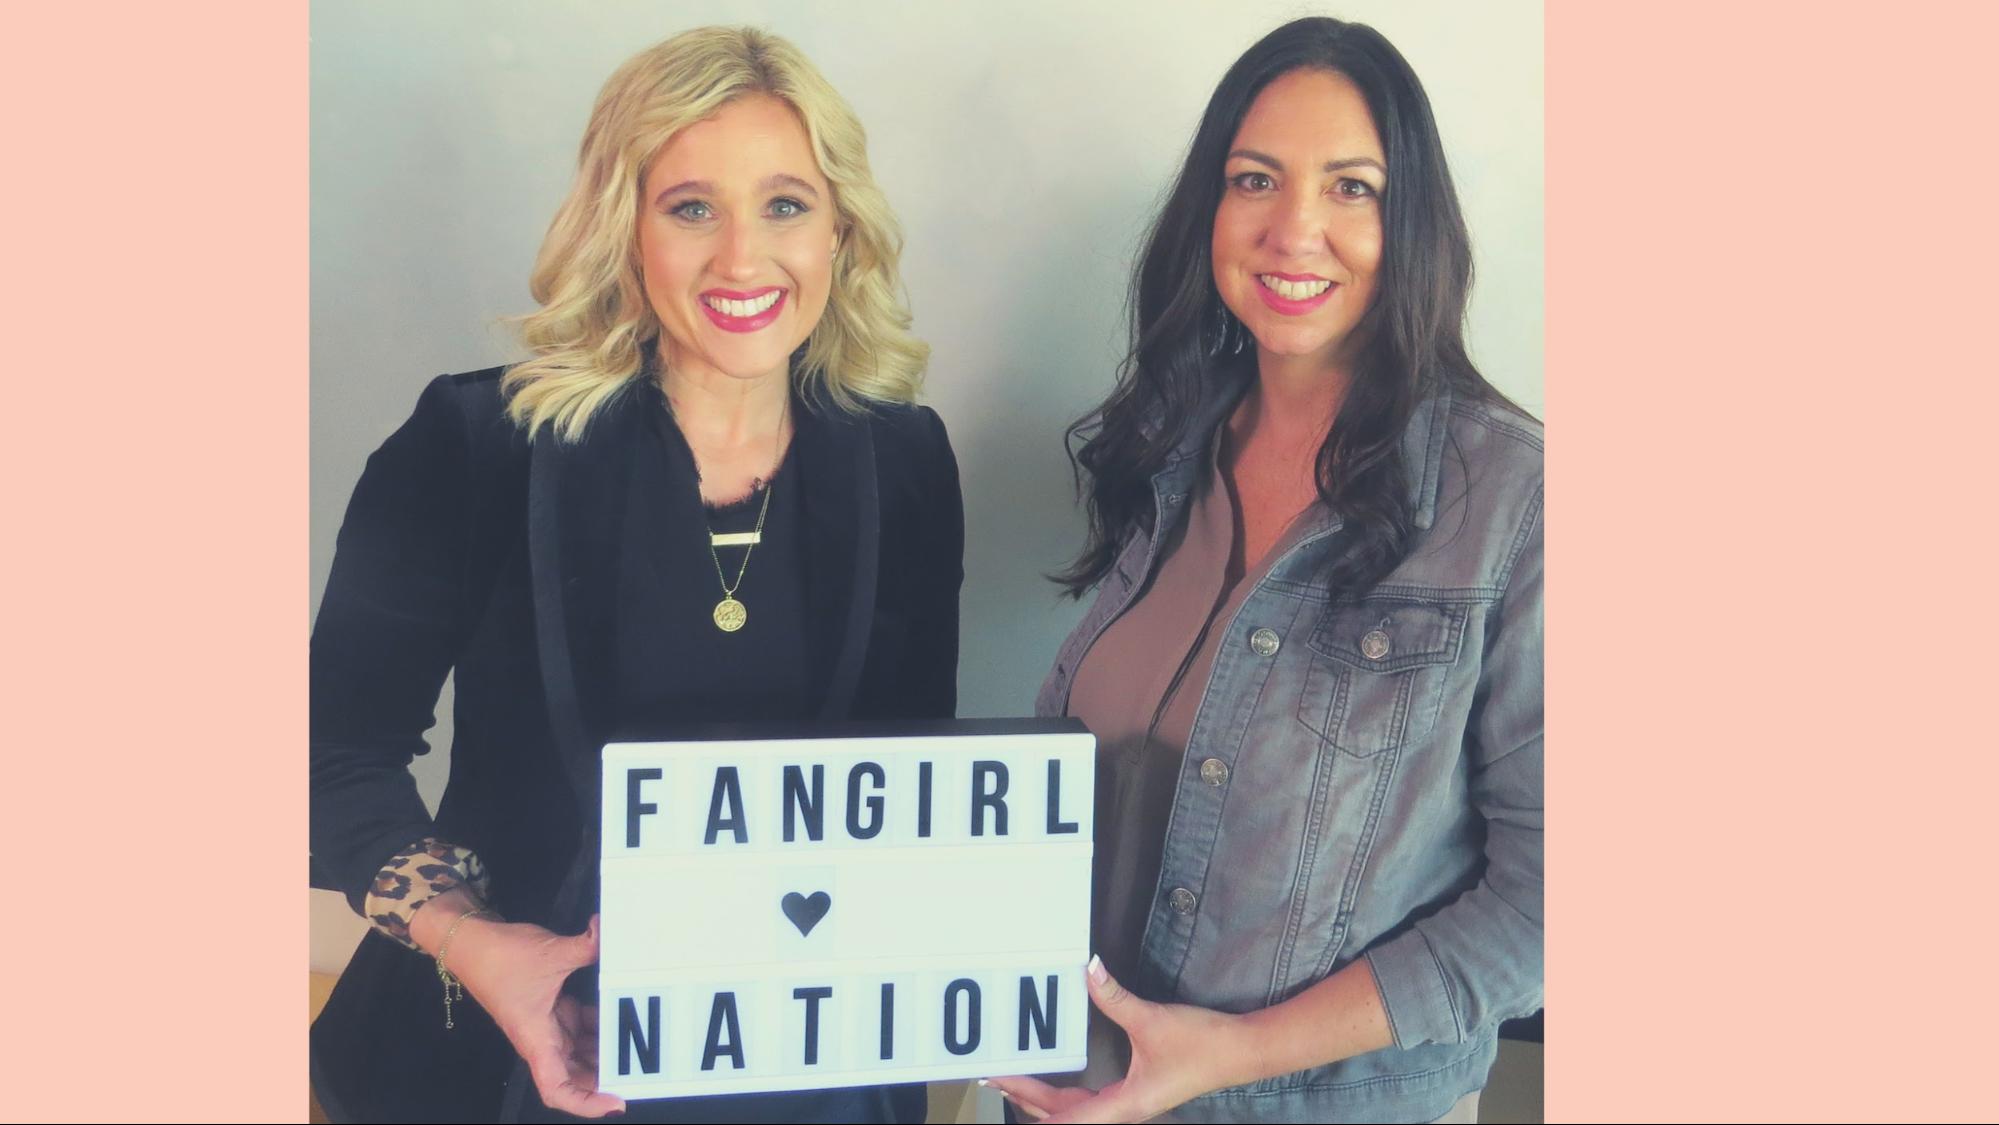 Fangirl Talk: Fangirls Talking Mahomes, Goff, and the New NFL